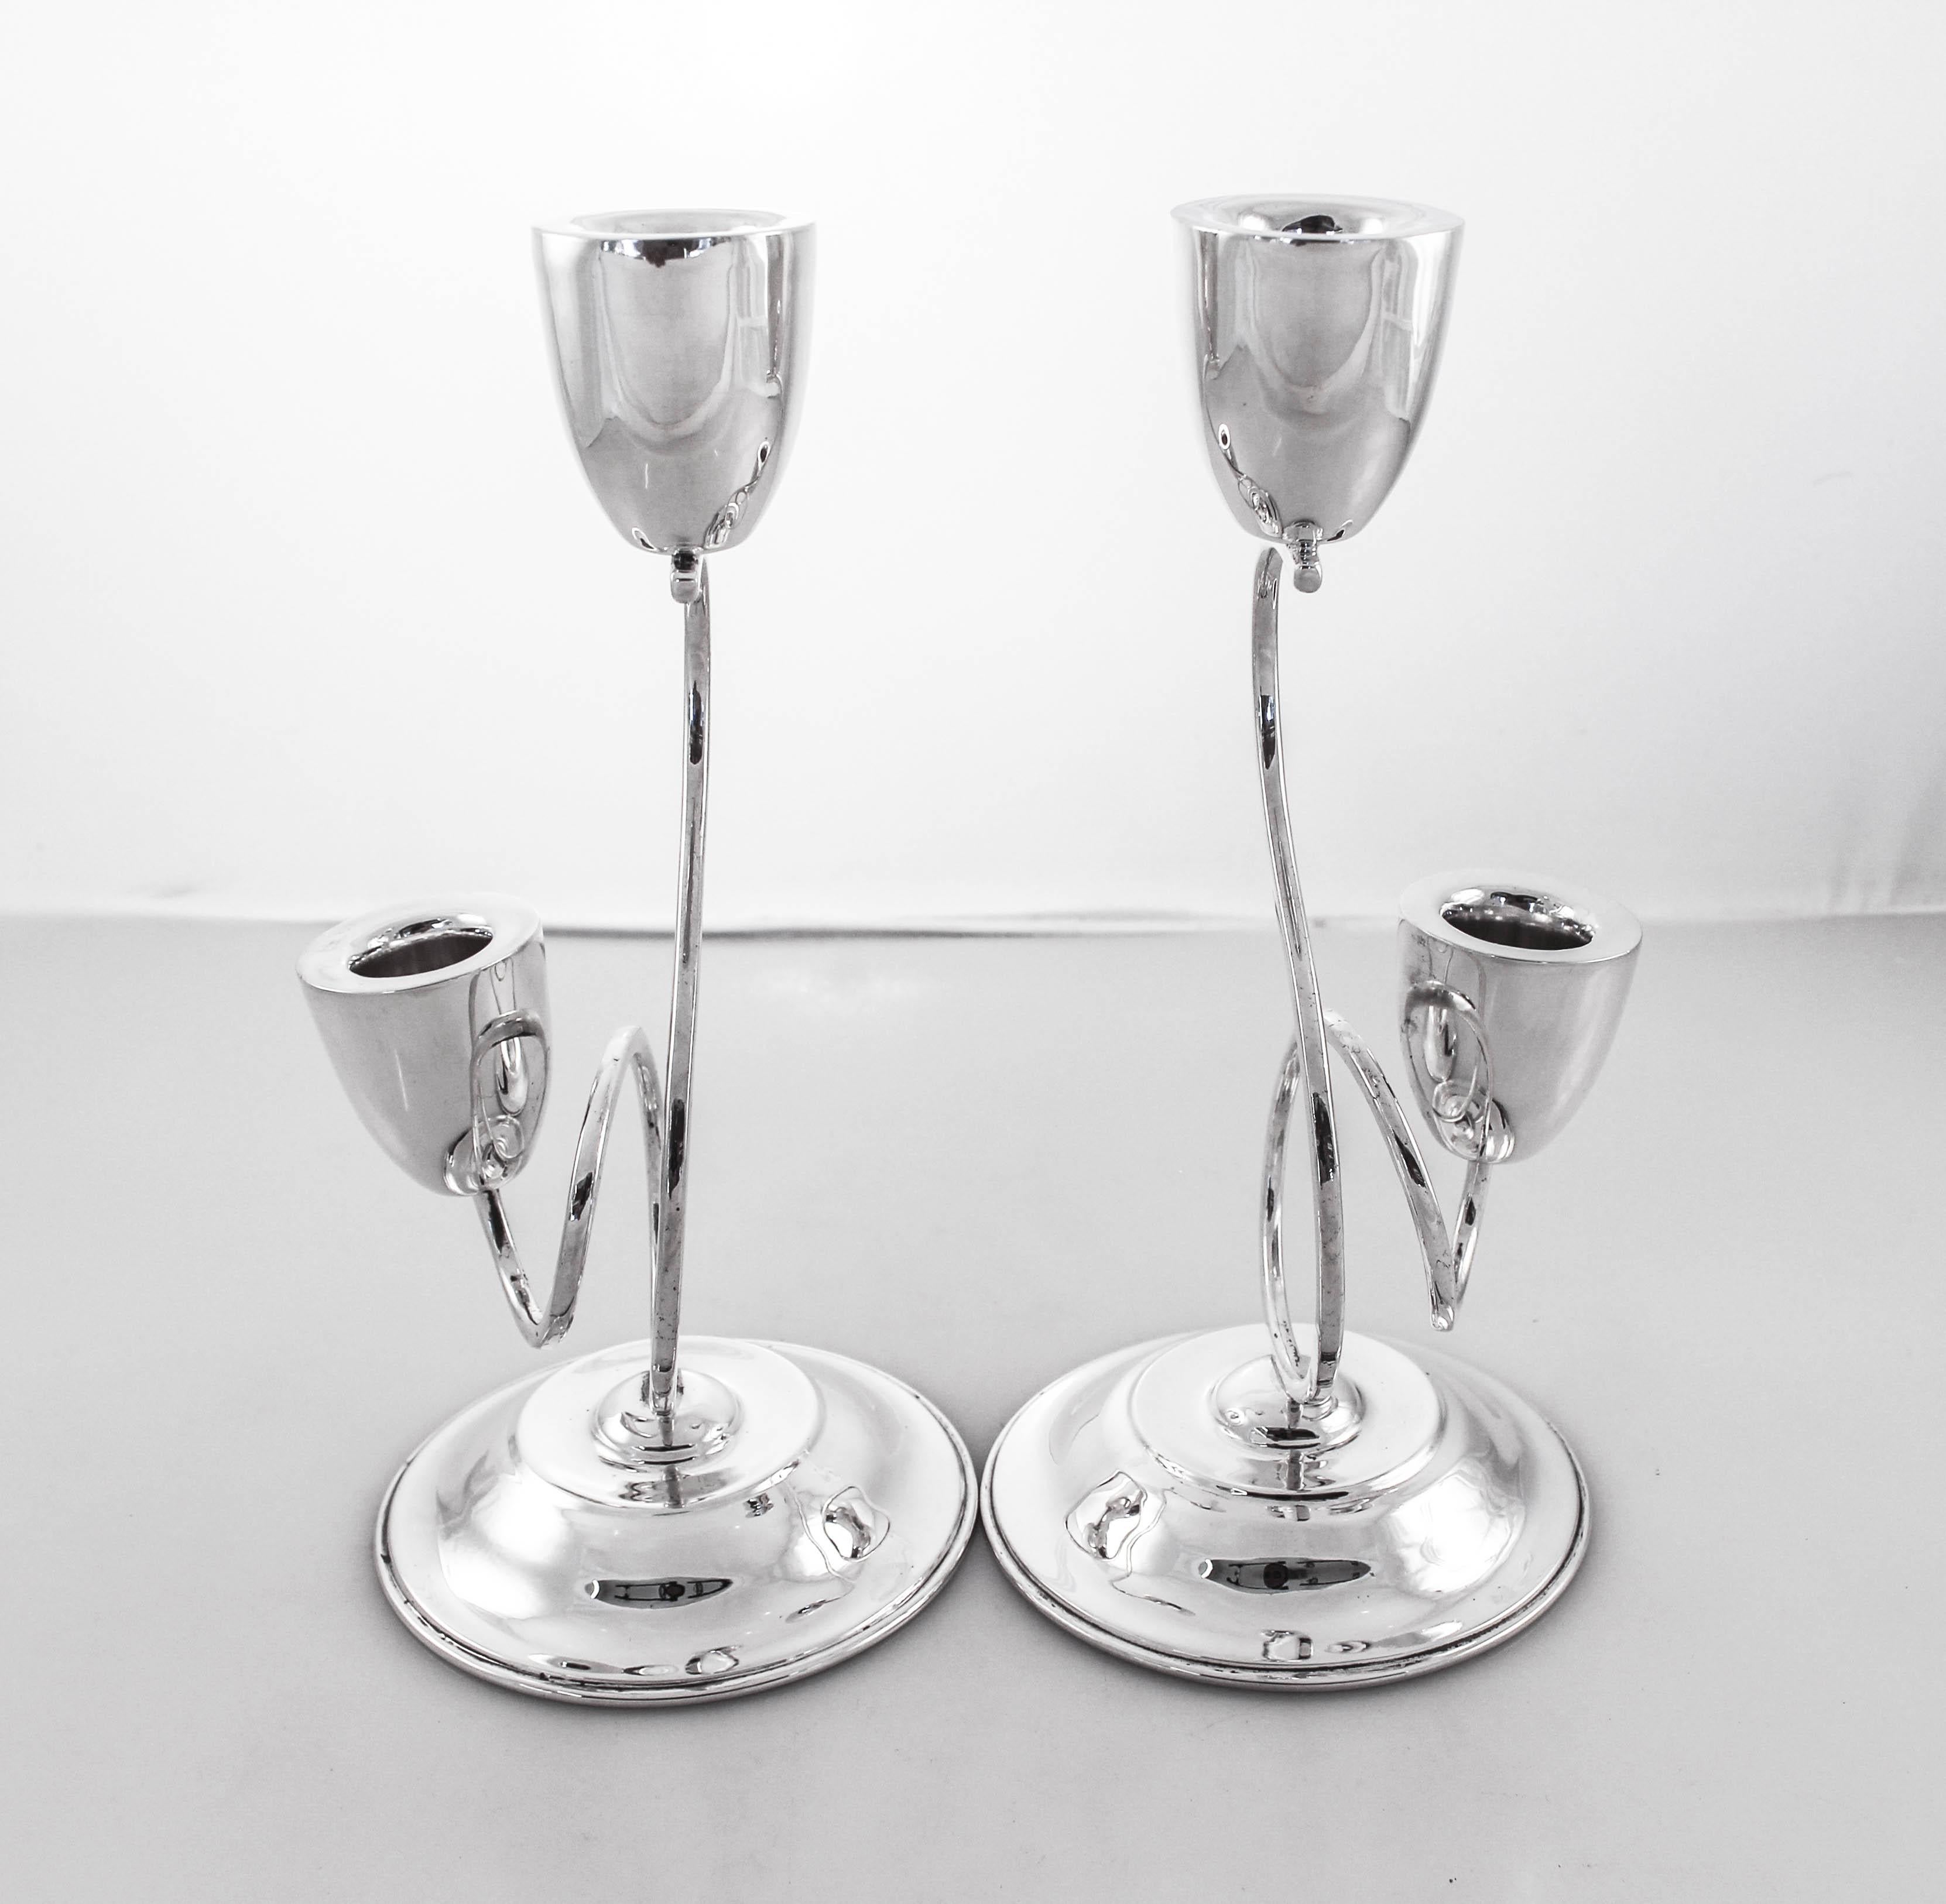 A pair of sterling silver two-branch candelabras from 1952. The taller candleholder stands at 10 inches while the other is 4.5 inches high. They are connected with a curled S-shaped piece, giving these candelabra a more casual midcentury feel. The